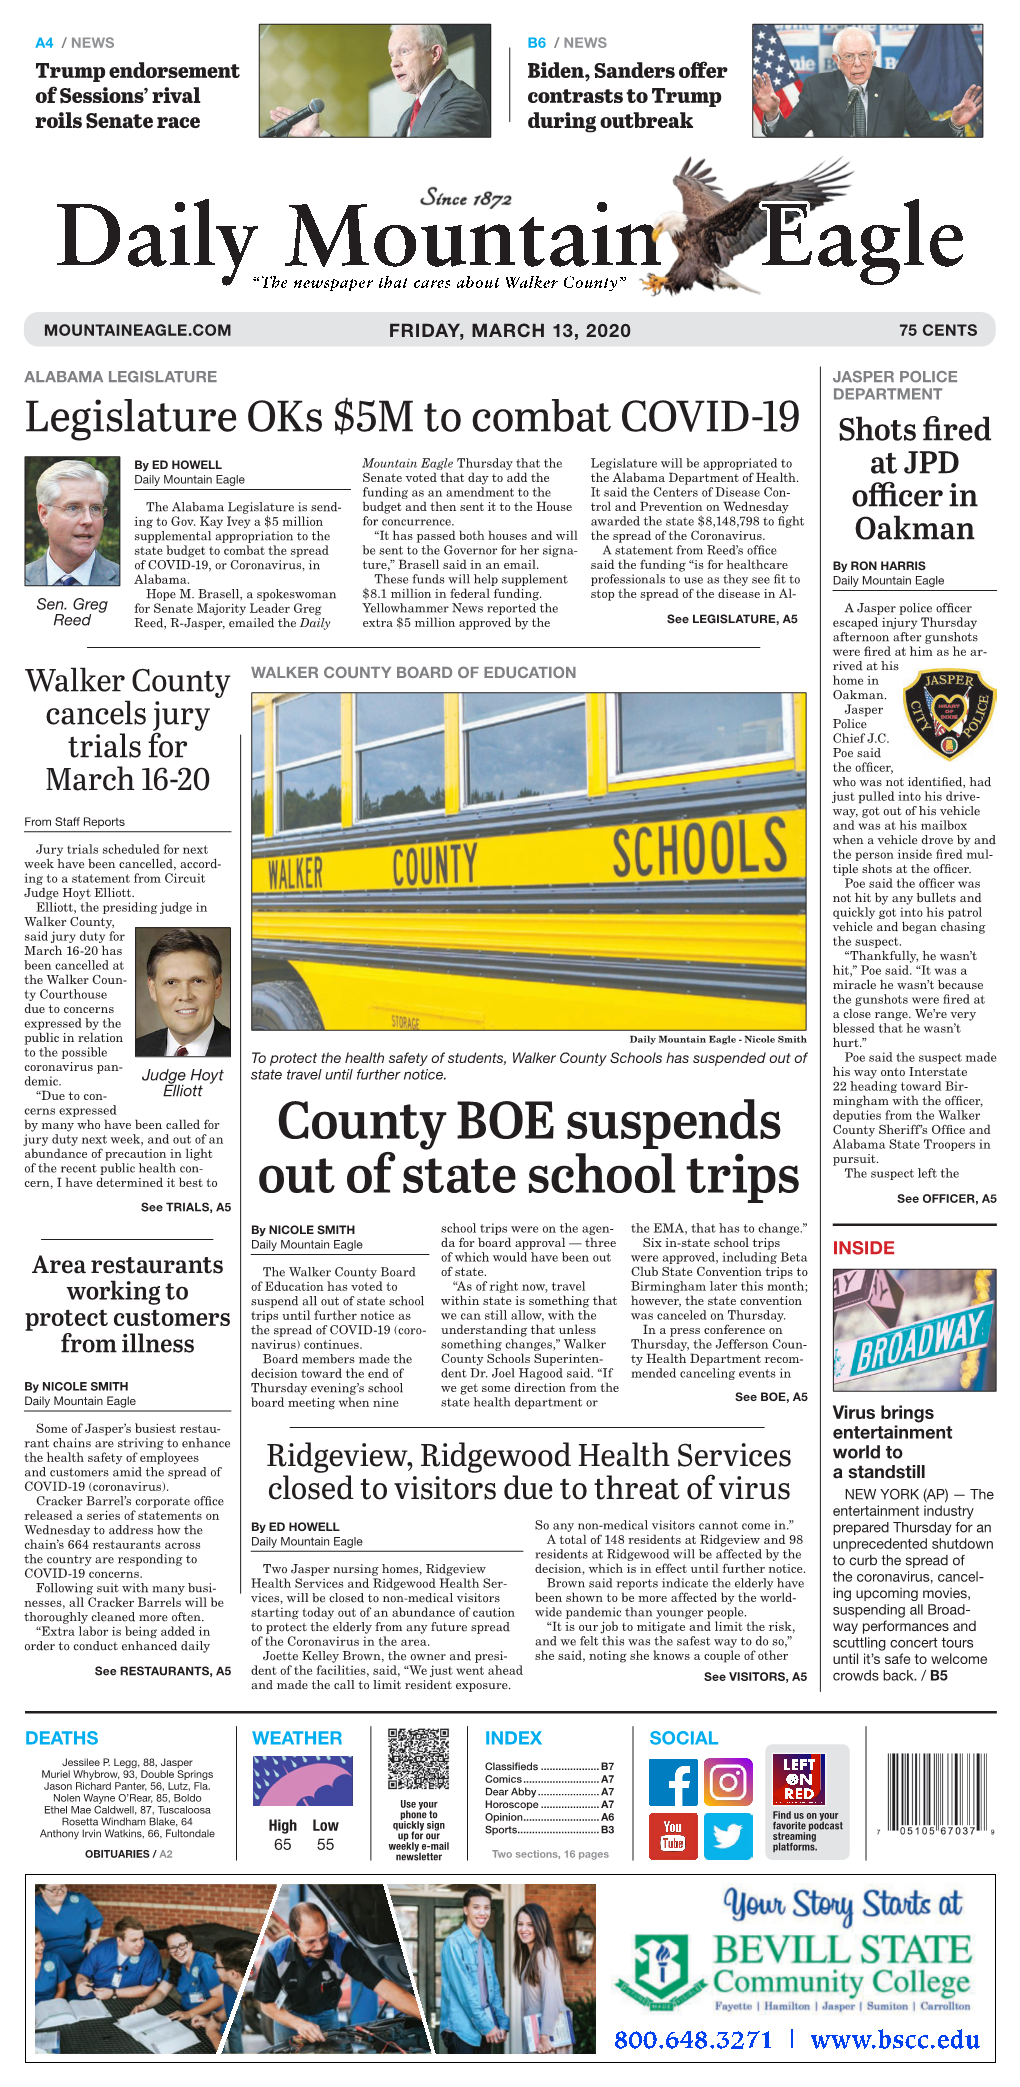 County BOE Suspends out of State School Trips